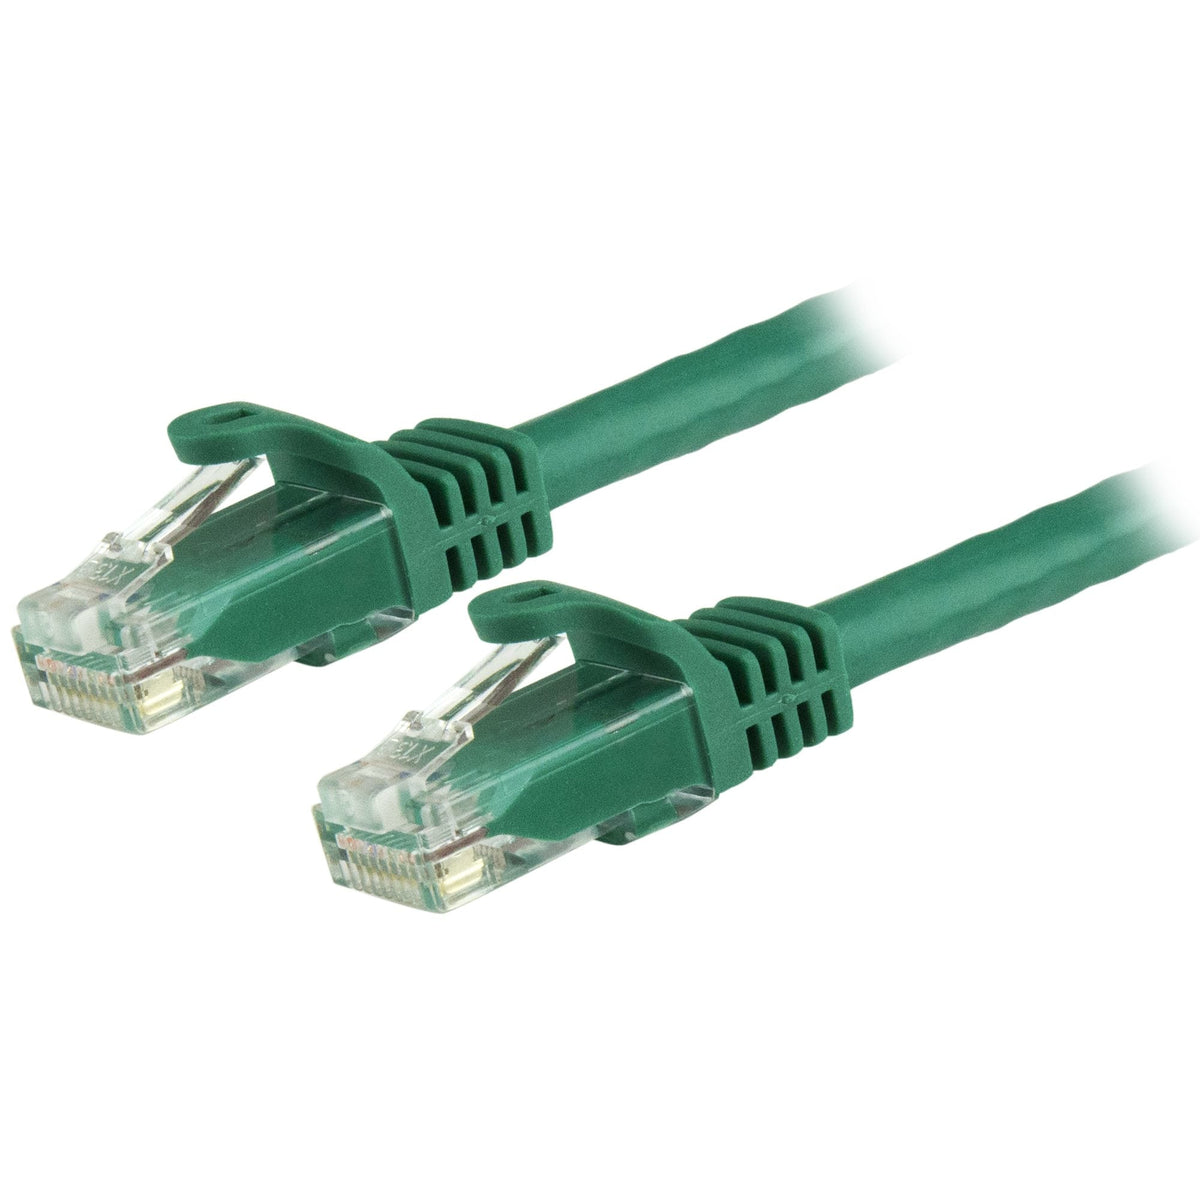 StarTech.com 1.5m CAT6 Ethernet Cable - Green CAT 6 Gigabit Ethernet Wire -650MHz 100W PoE RJ45 UTP Network/Patch Cord Snagless w/Strain Relief Fluke Tested/Wiring is UL Certified/TIA